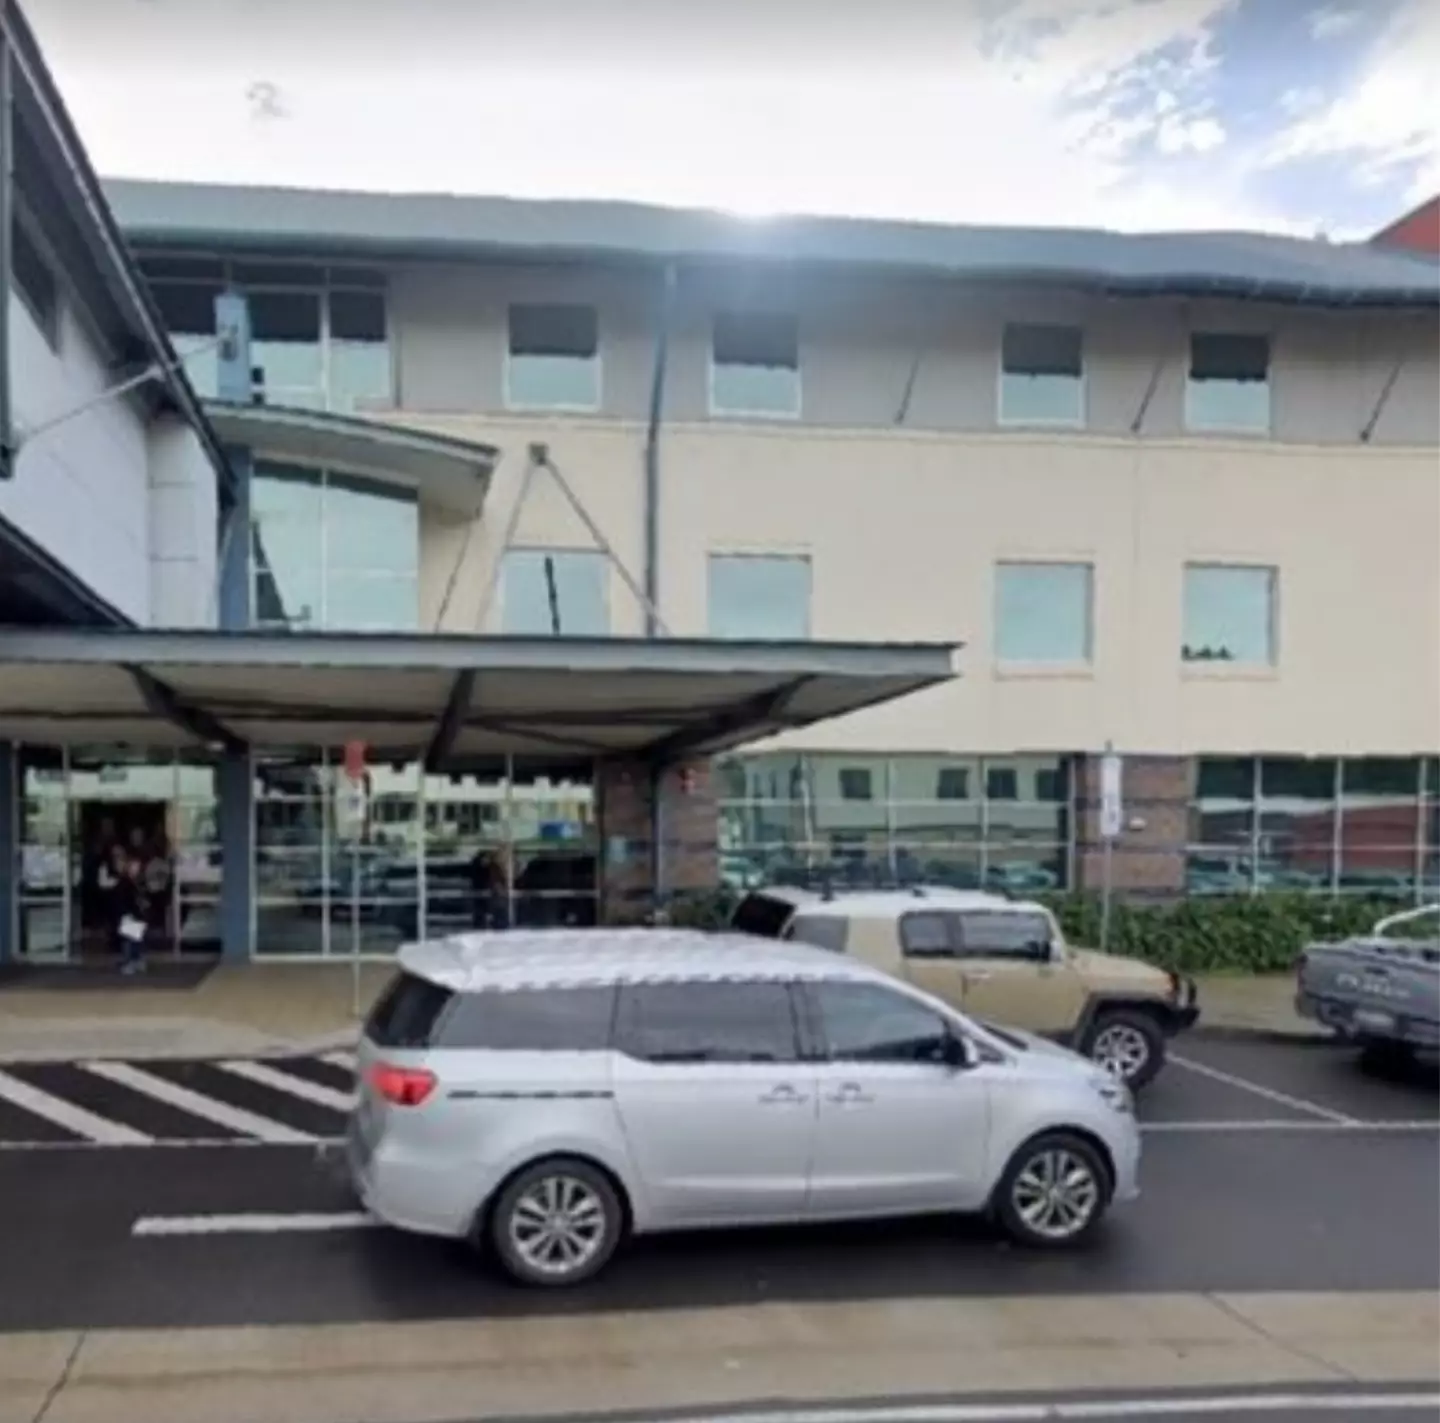 The 85-year-old man was admitted to the Nepean Private Hospital on 16 July, 2021.